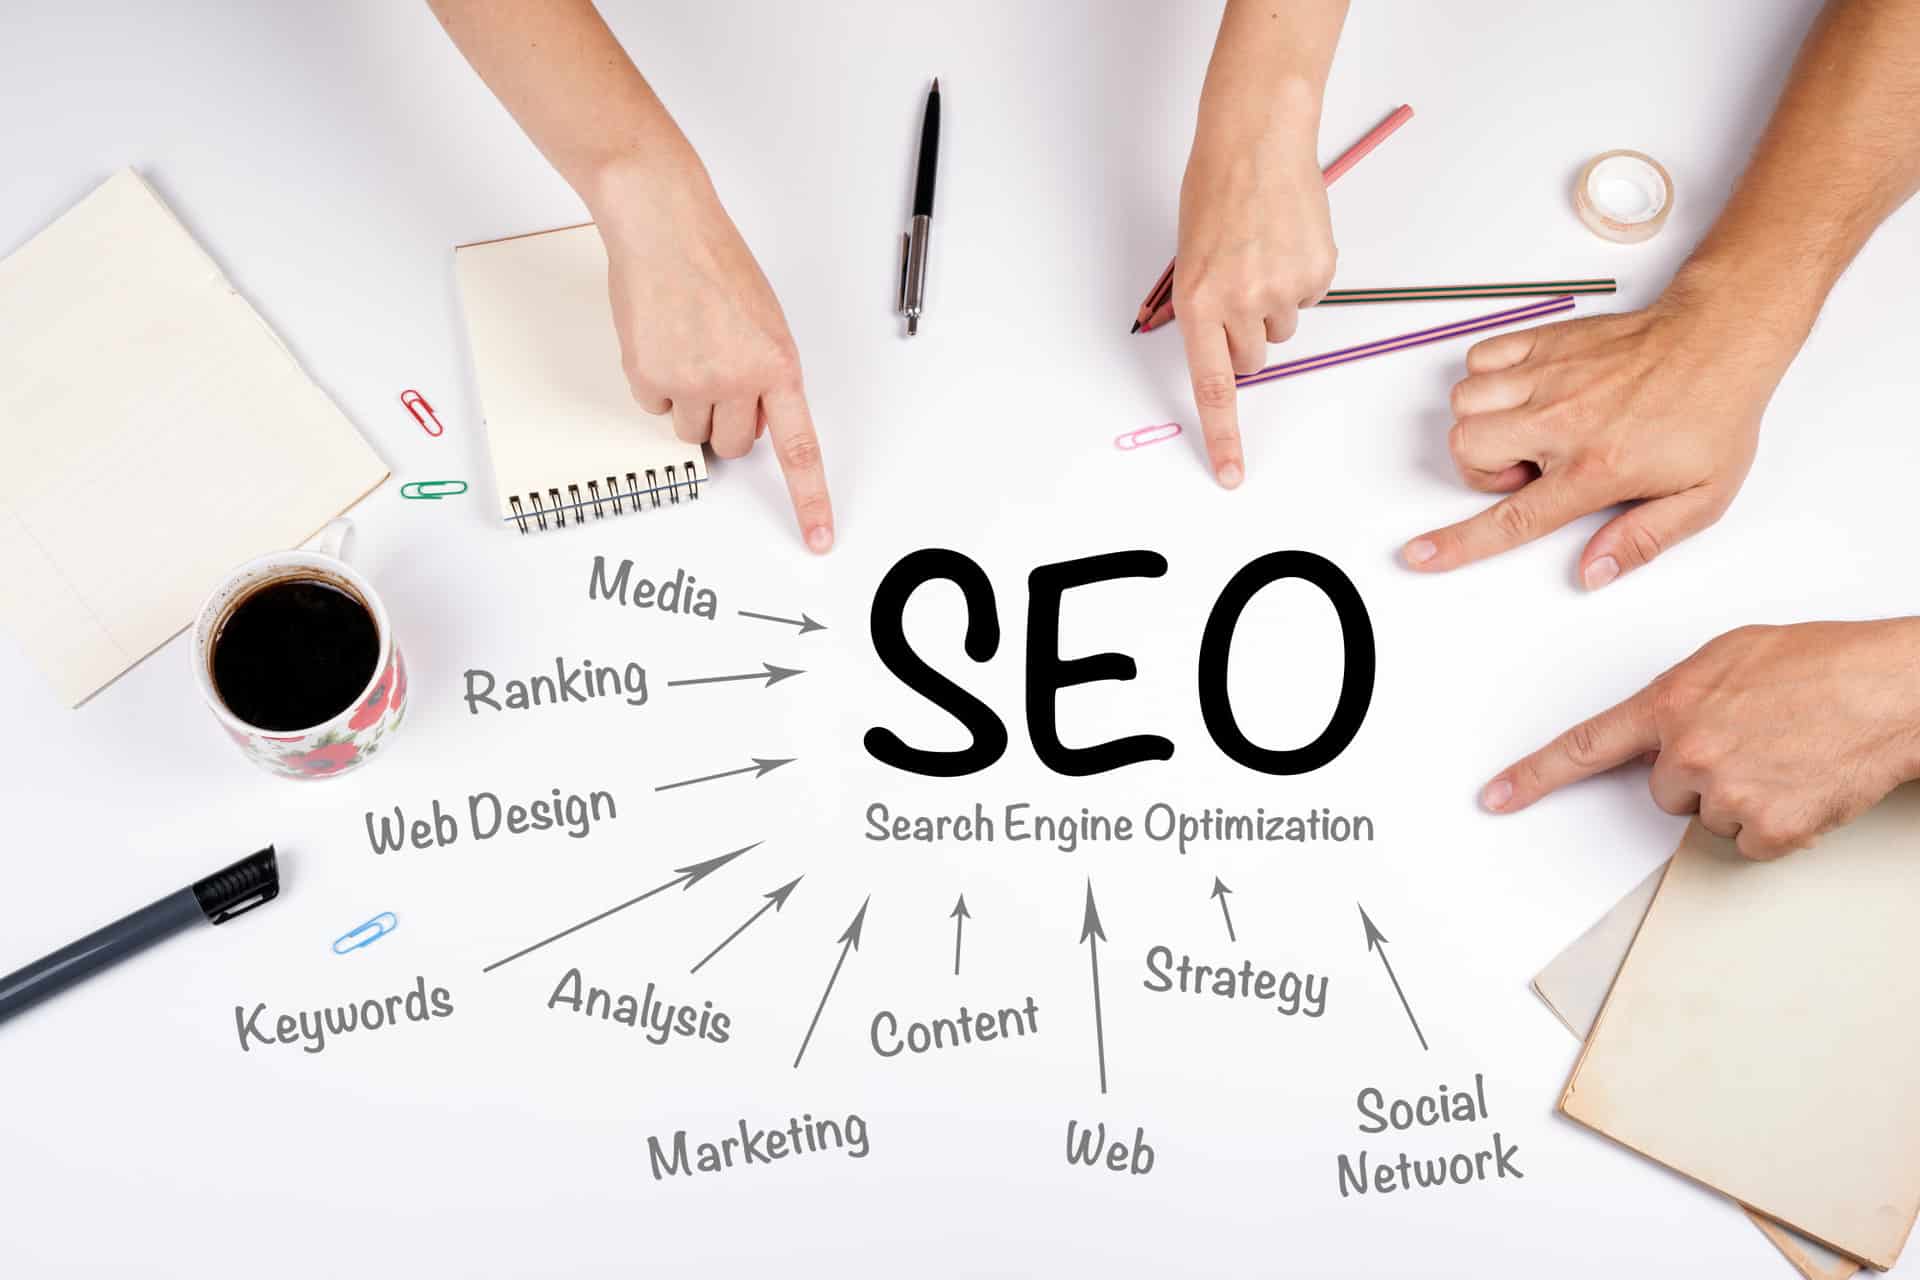 SEO Campaign - How To Plan An SEO Campaign To Gain Higher Rankings